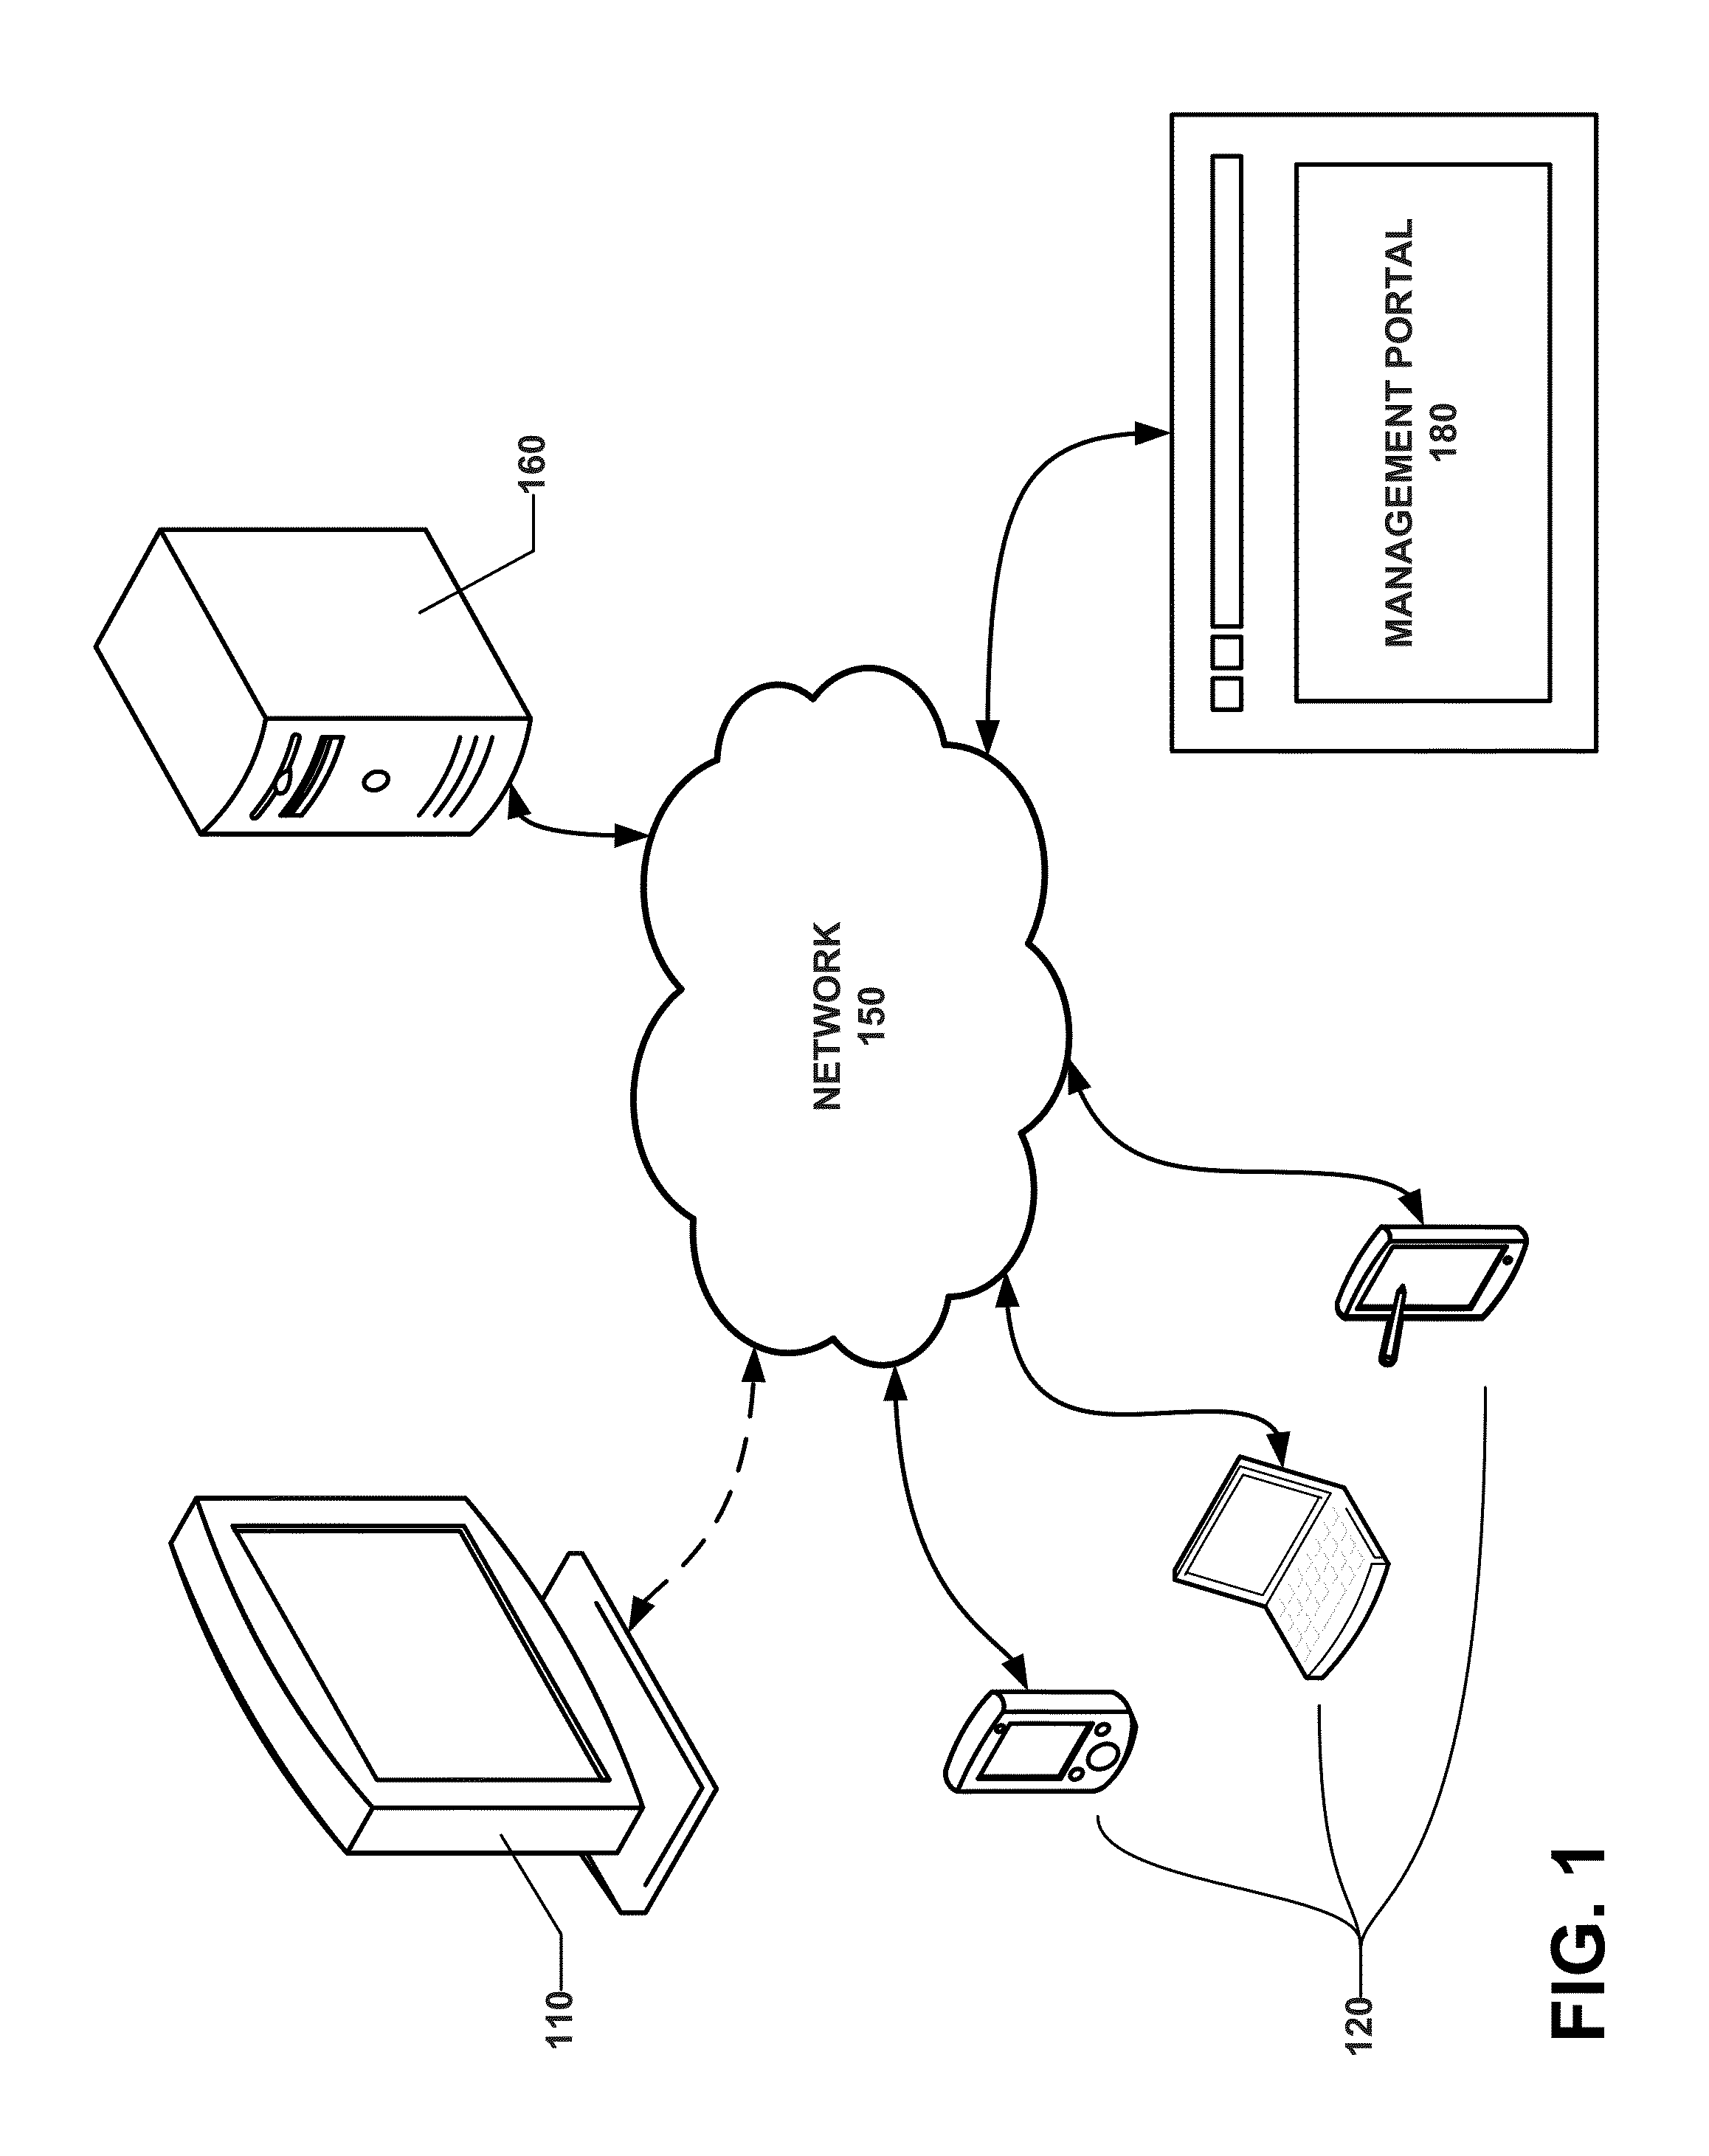 Systems and methods for identifying, interacting with, and purchasing items of interest in a video